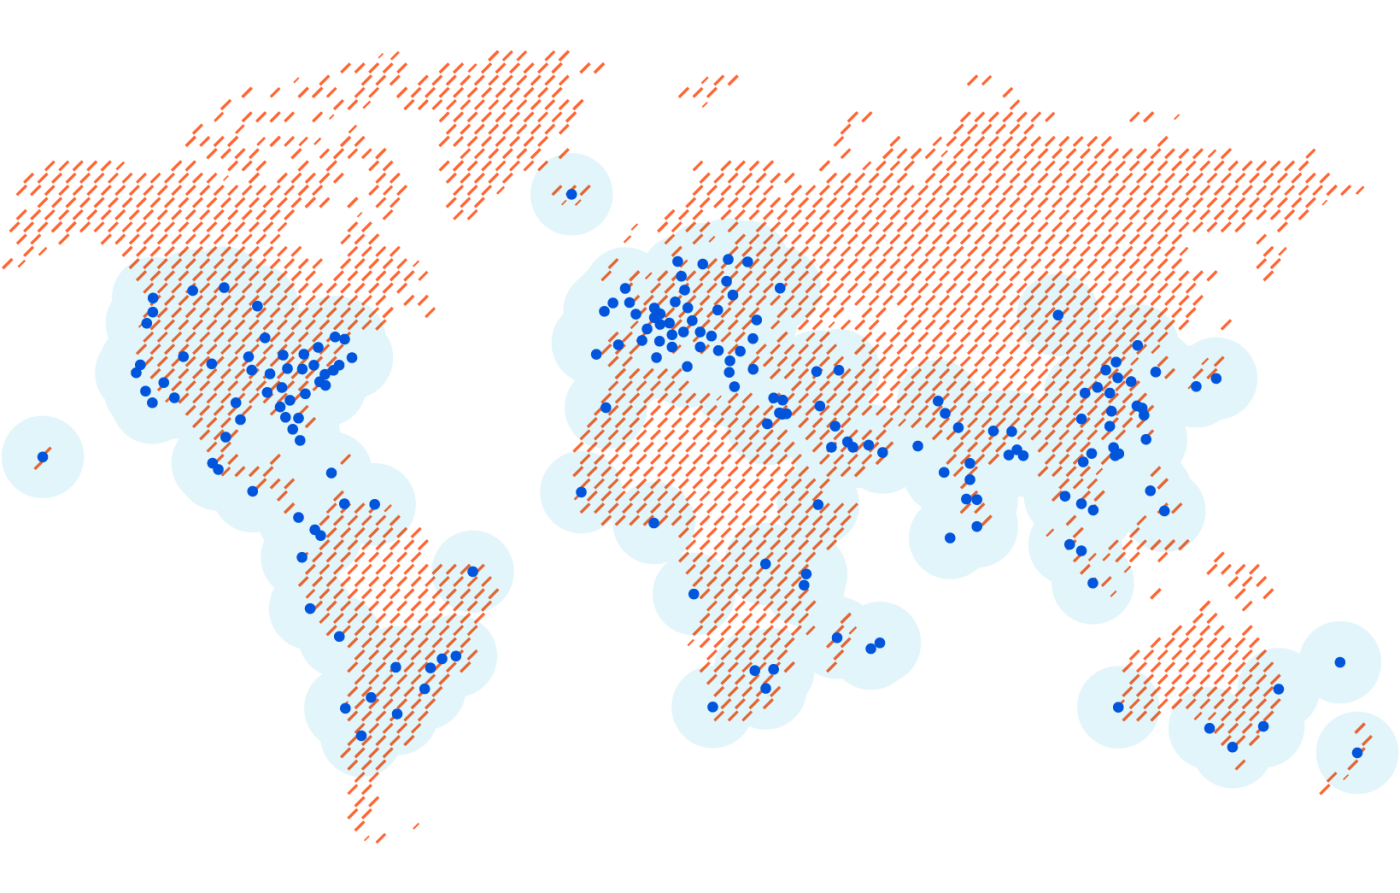 Cloudflare network map